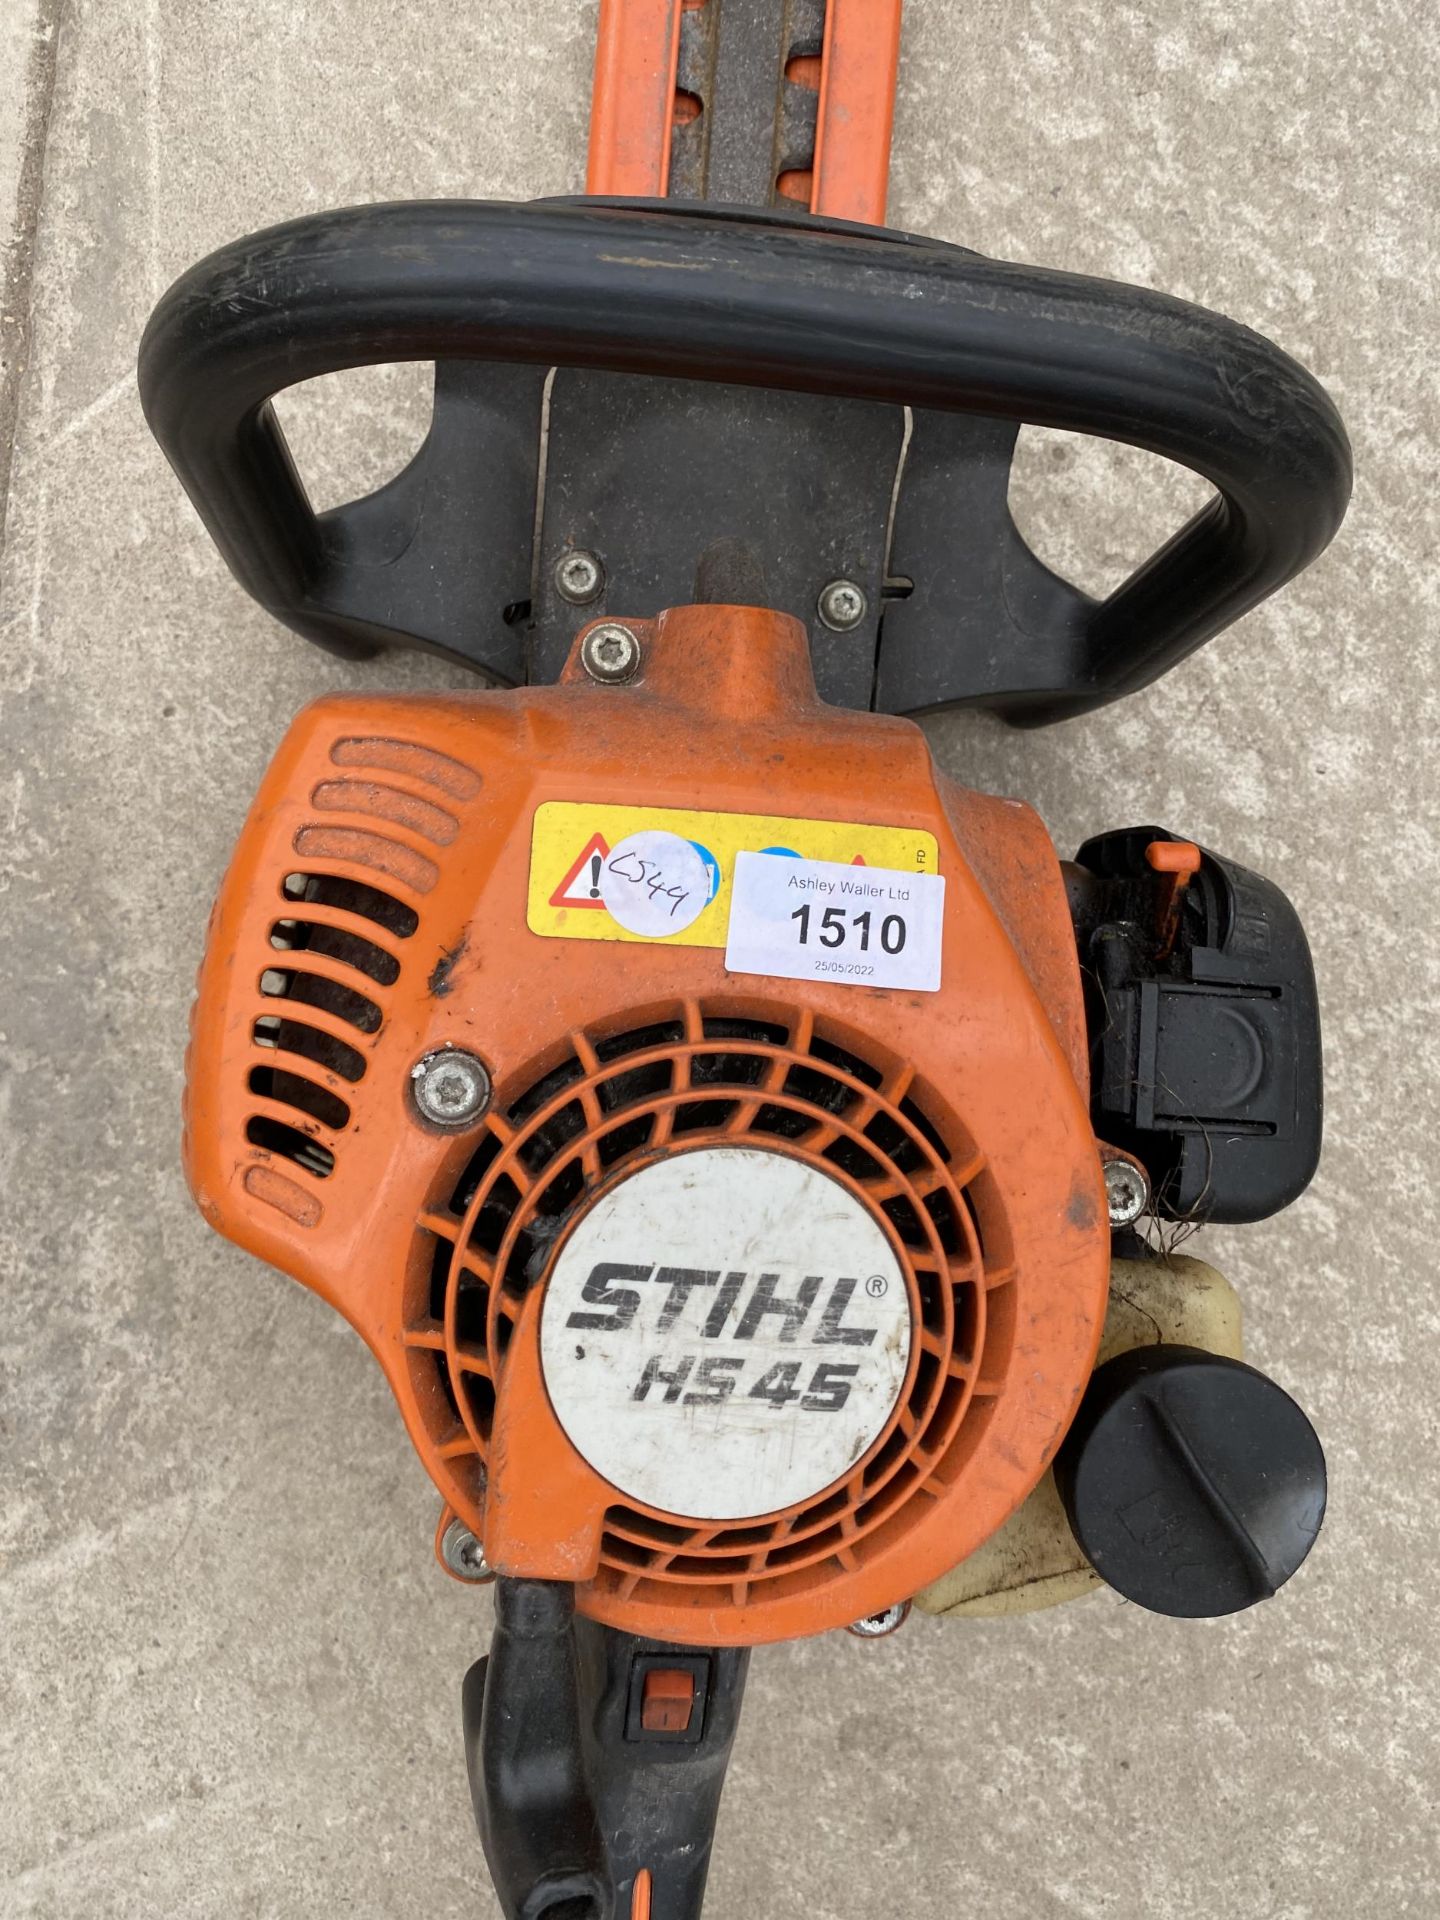 A STIHL HS45 PETROL HEDGE TRIMMER - Image 2 of 4